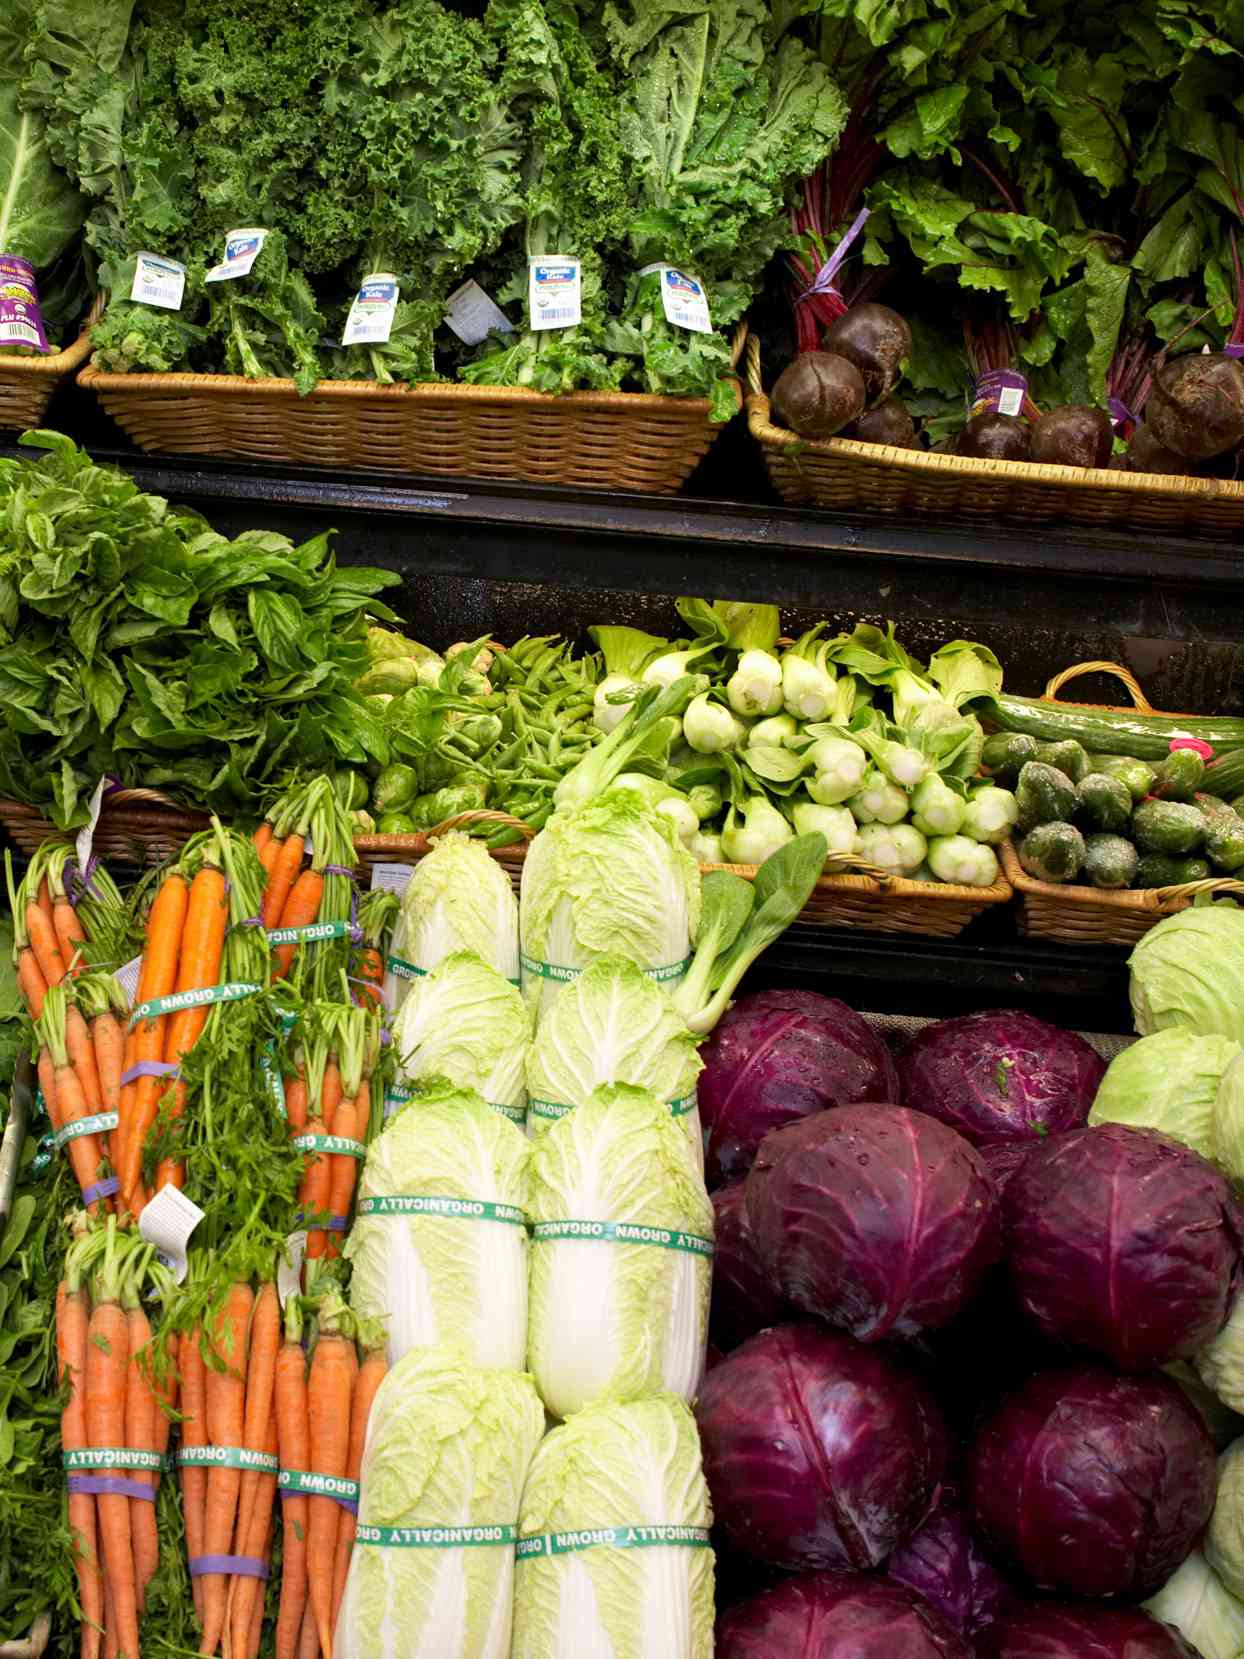 cabbage and other produce on stand